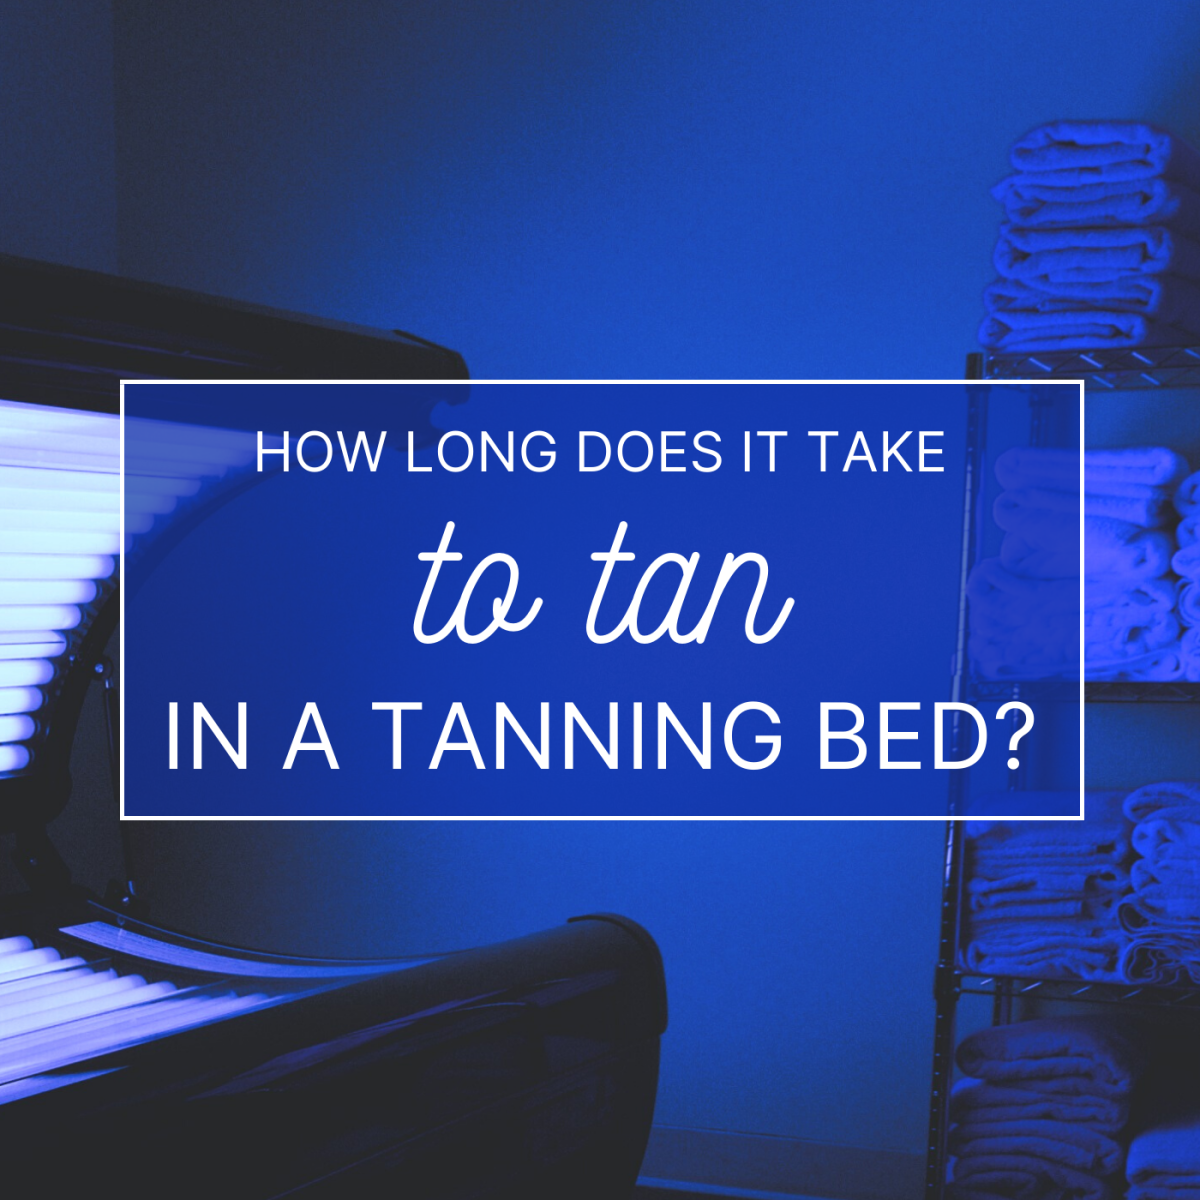 How Long Does It Take to Get a Tan in a Tanning Bed?